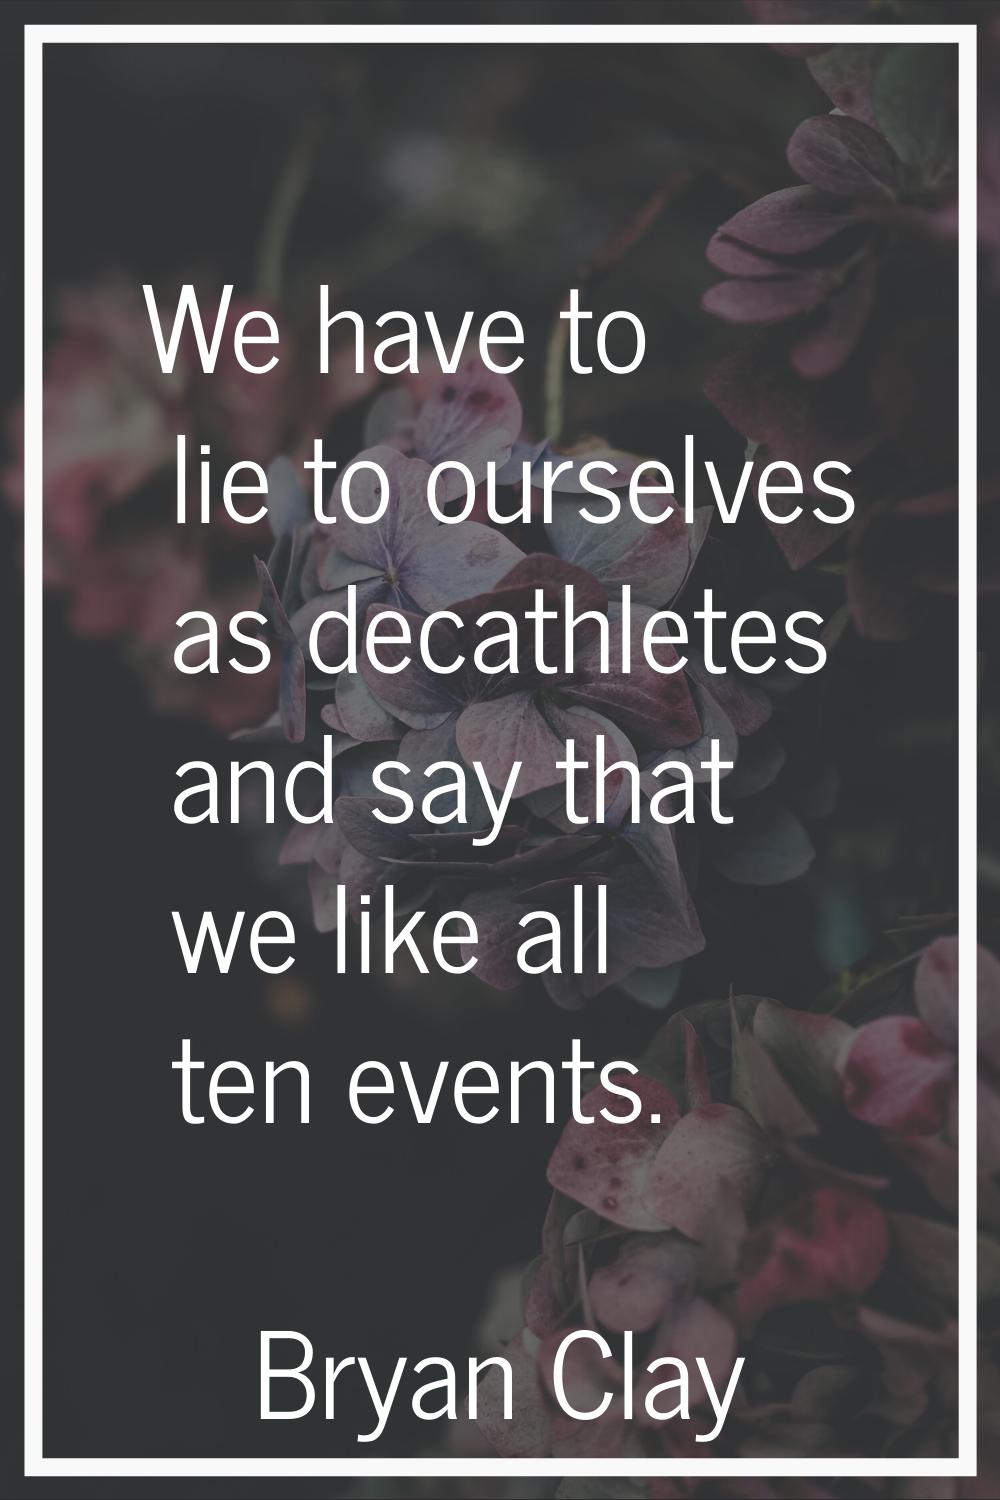 We have to lie to ourselves as decathletes and say that we like all ten events.